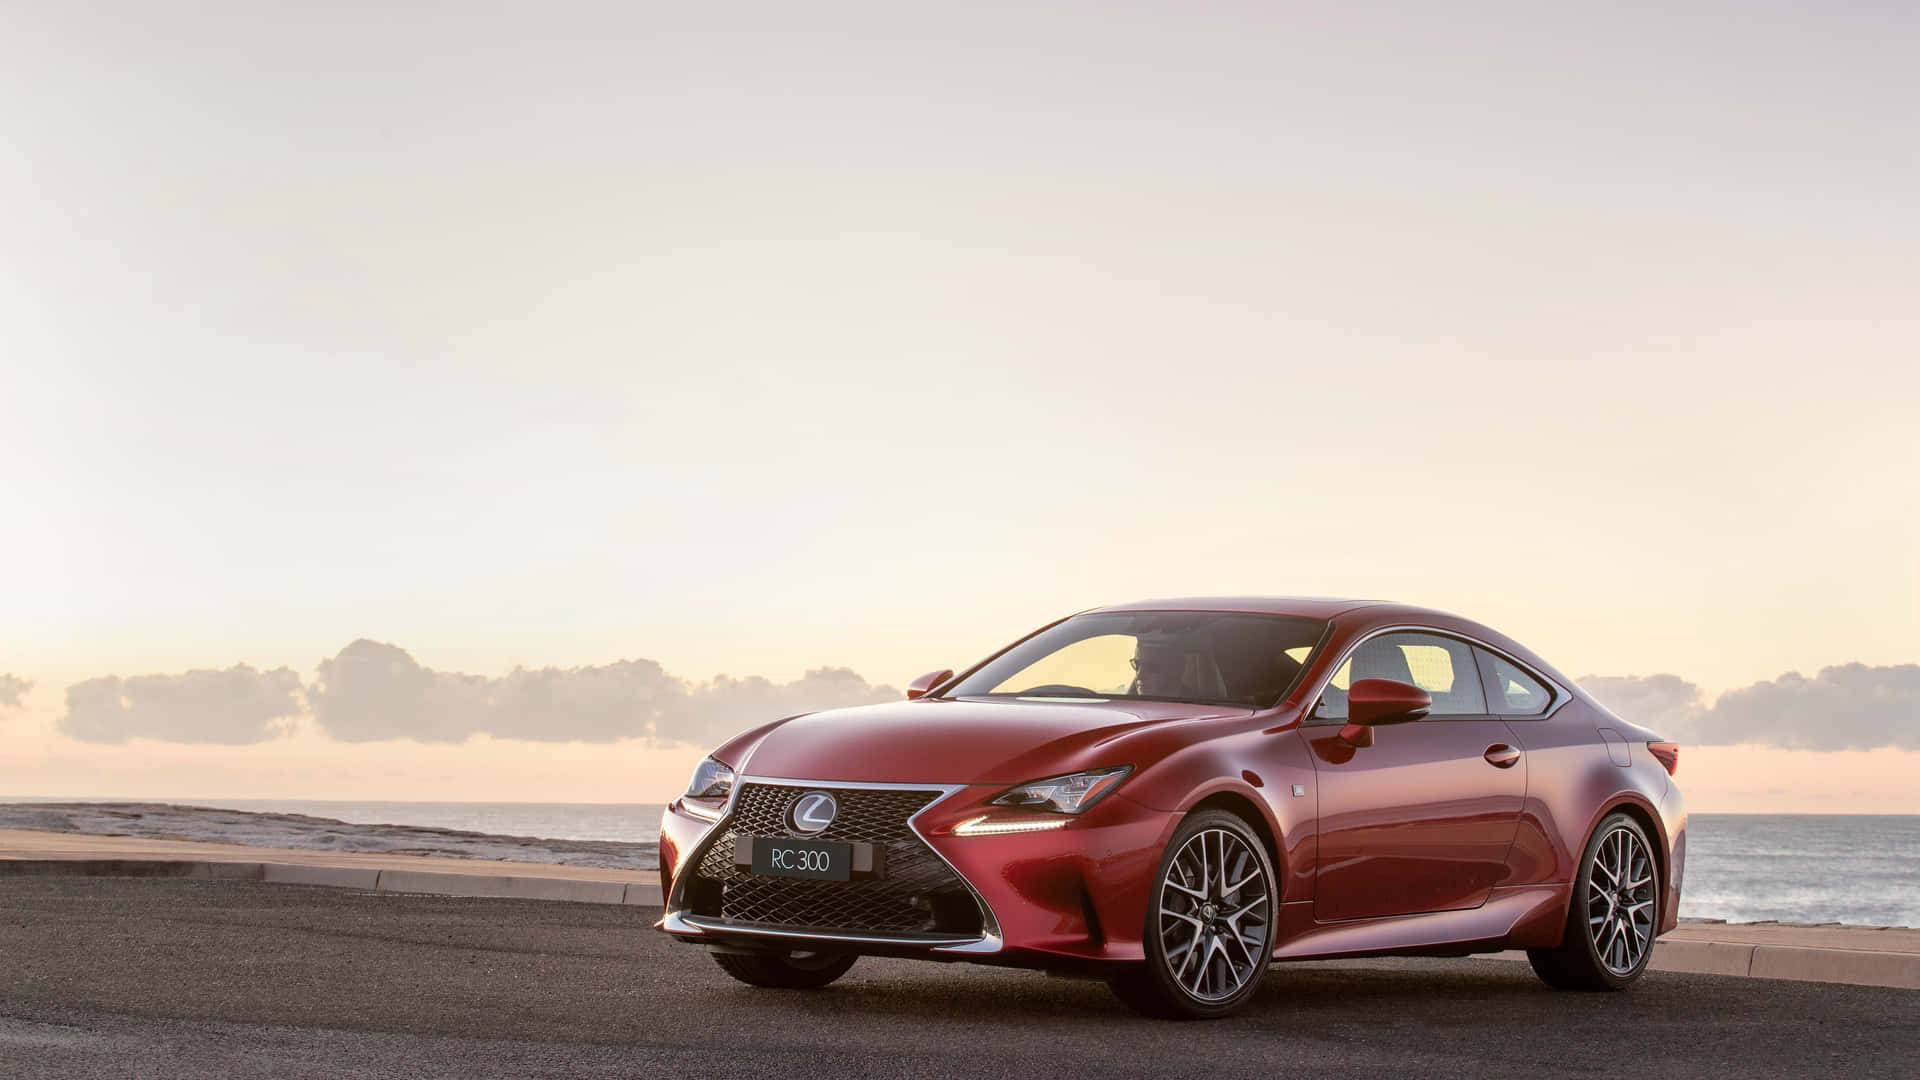 The Red Lexus Rc - F Coupe Is Parked On The Beach Background